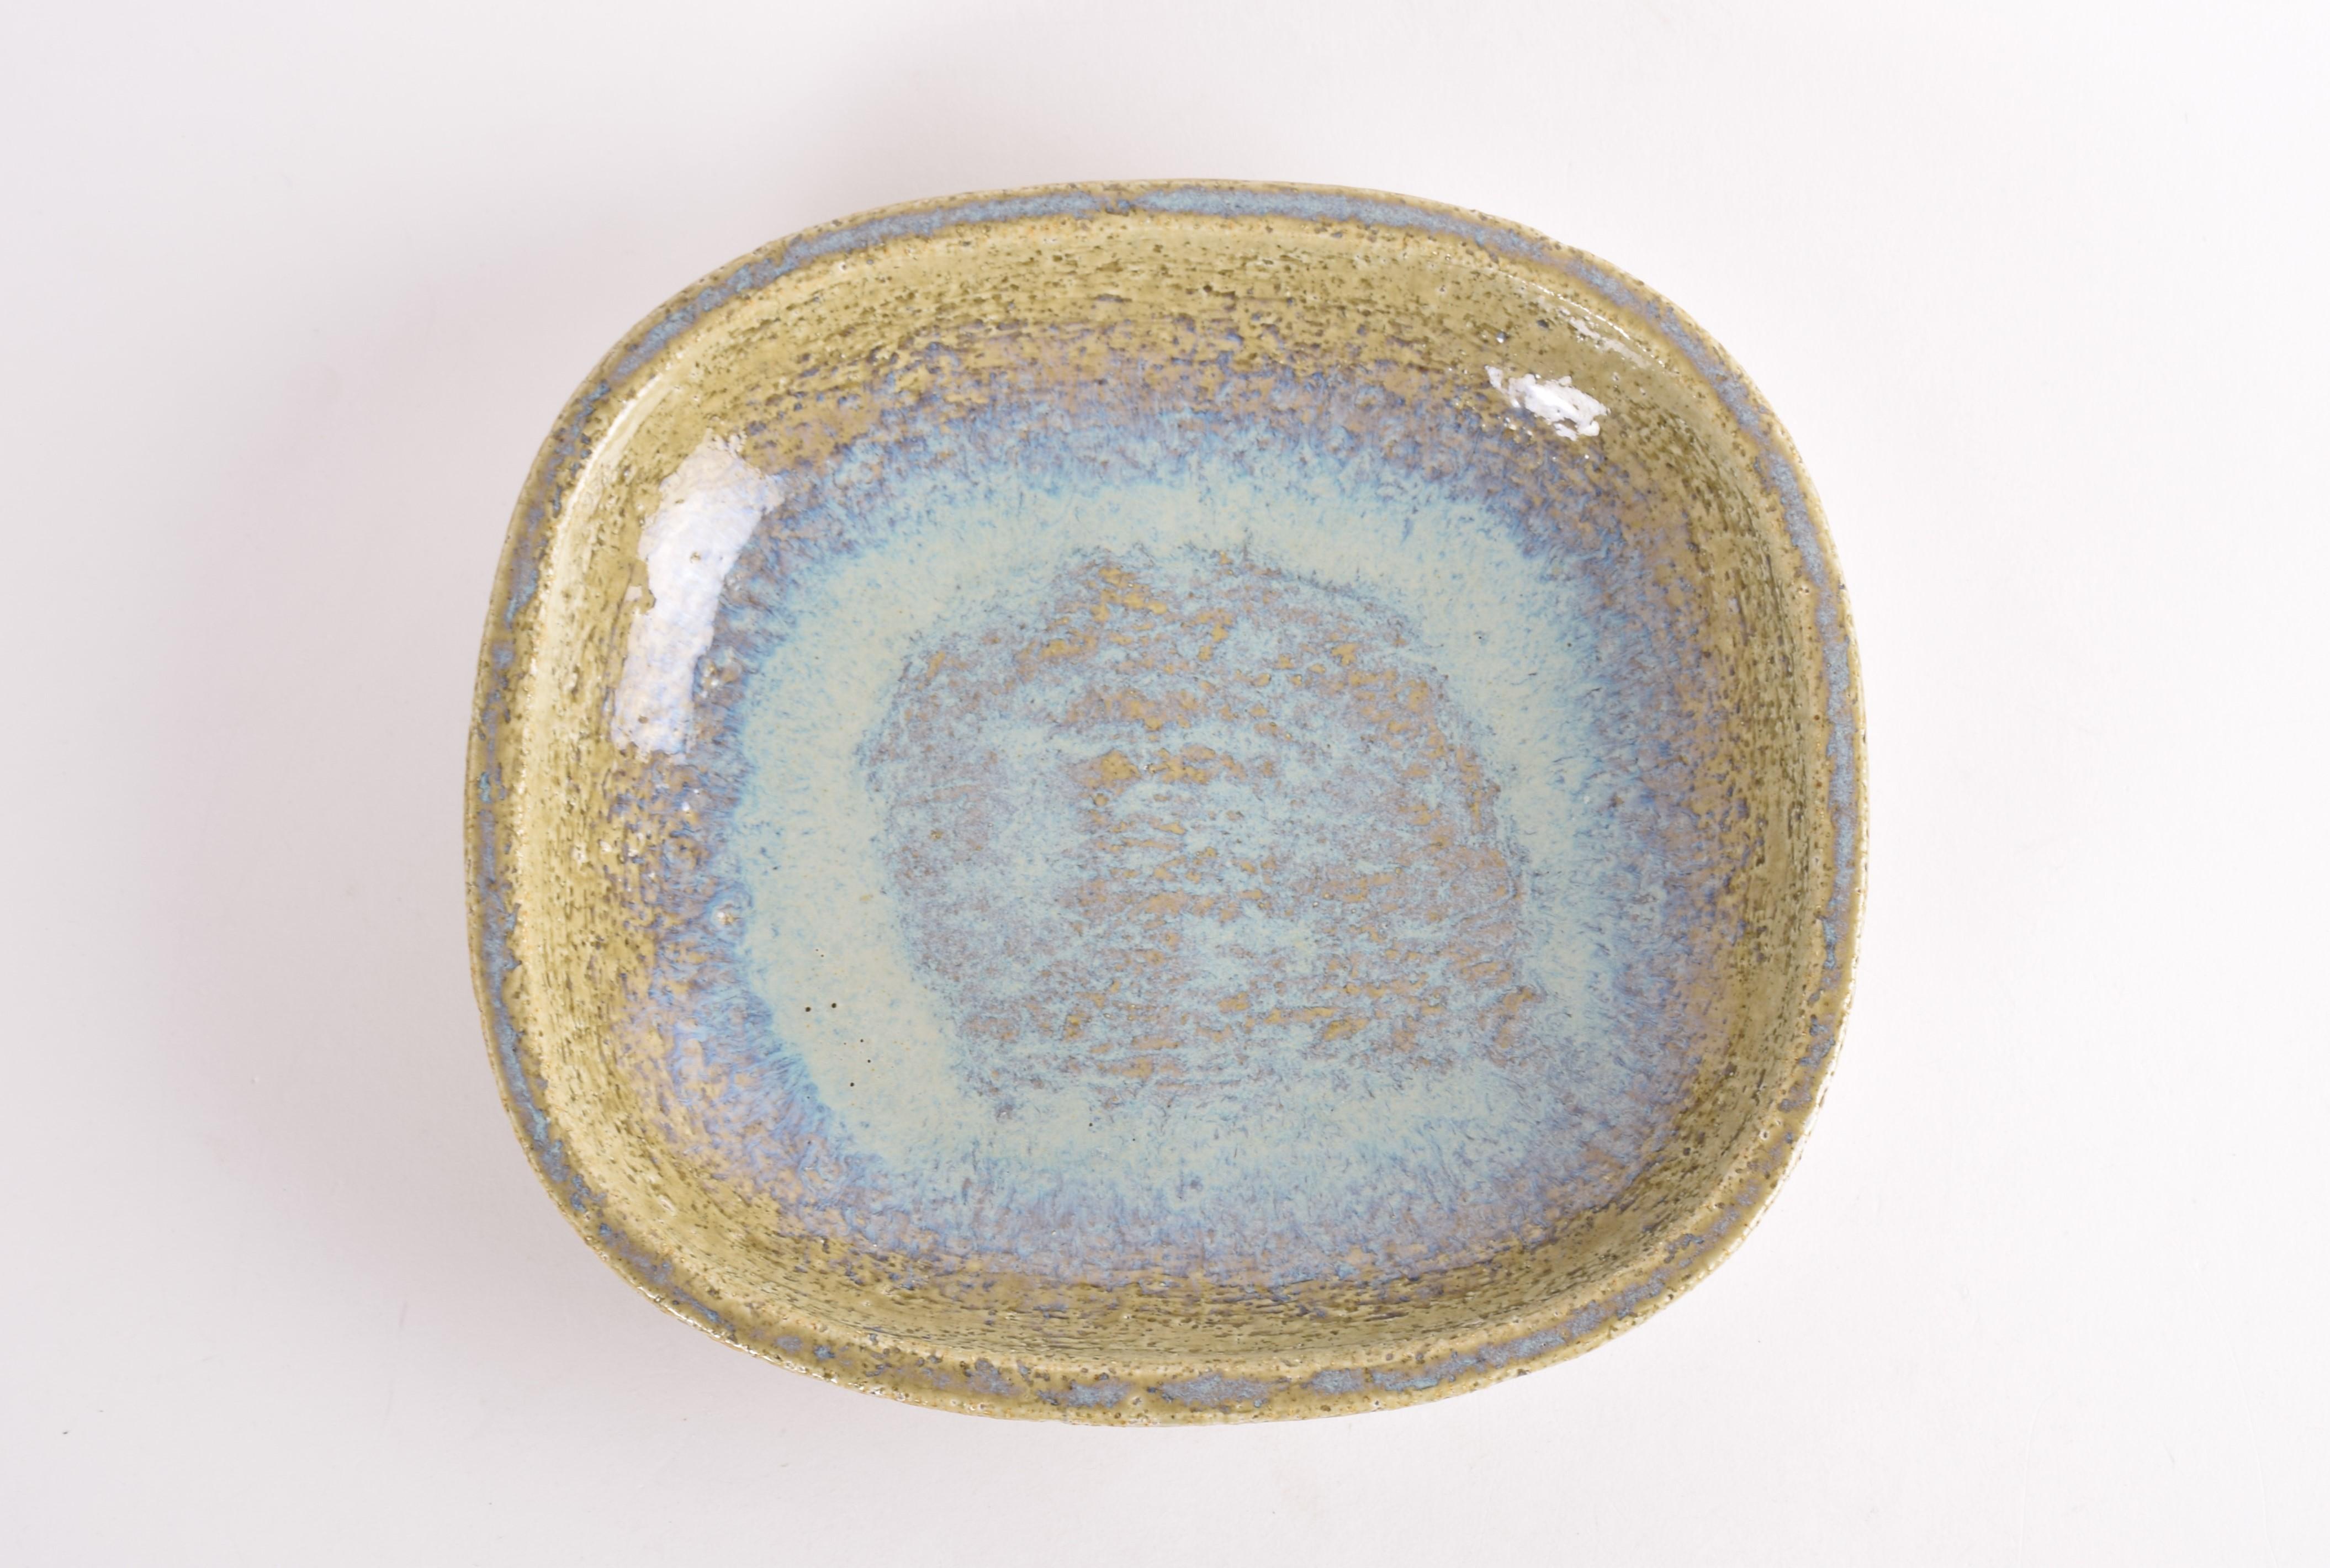 A large ceramic flat bowl by Per Linnemann-Schmidt for Palshus Denmark. Made ca 1960s.
It is made with chamotte clay which gives a rough and vivid surface. The glaze is a beautiful play between a dusted green and pale blue. 

The bowl is fully